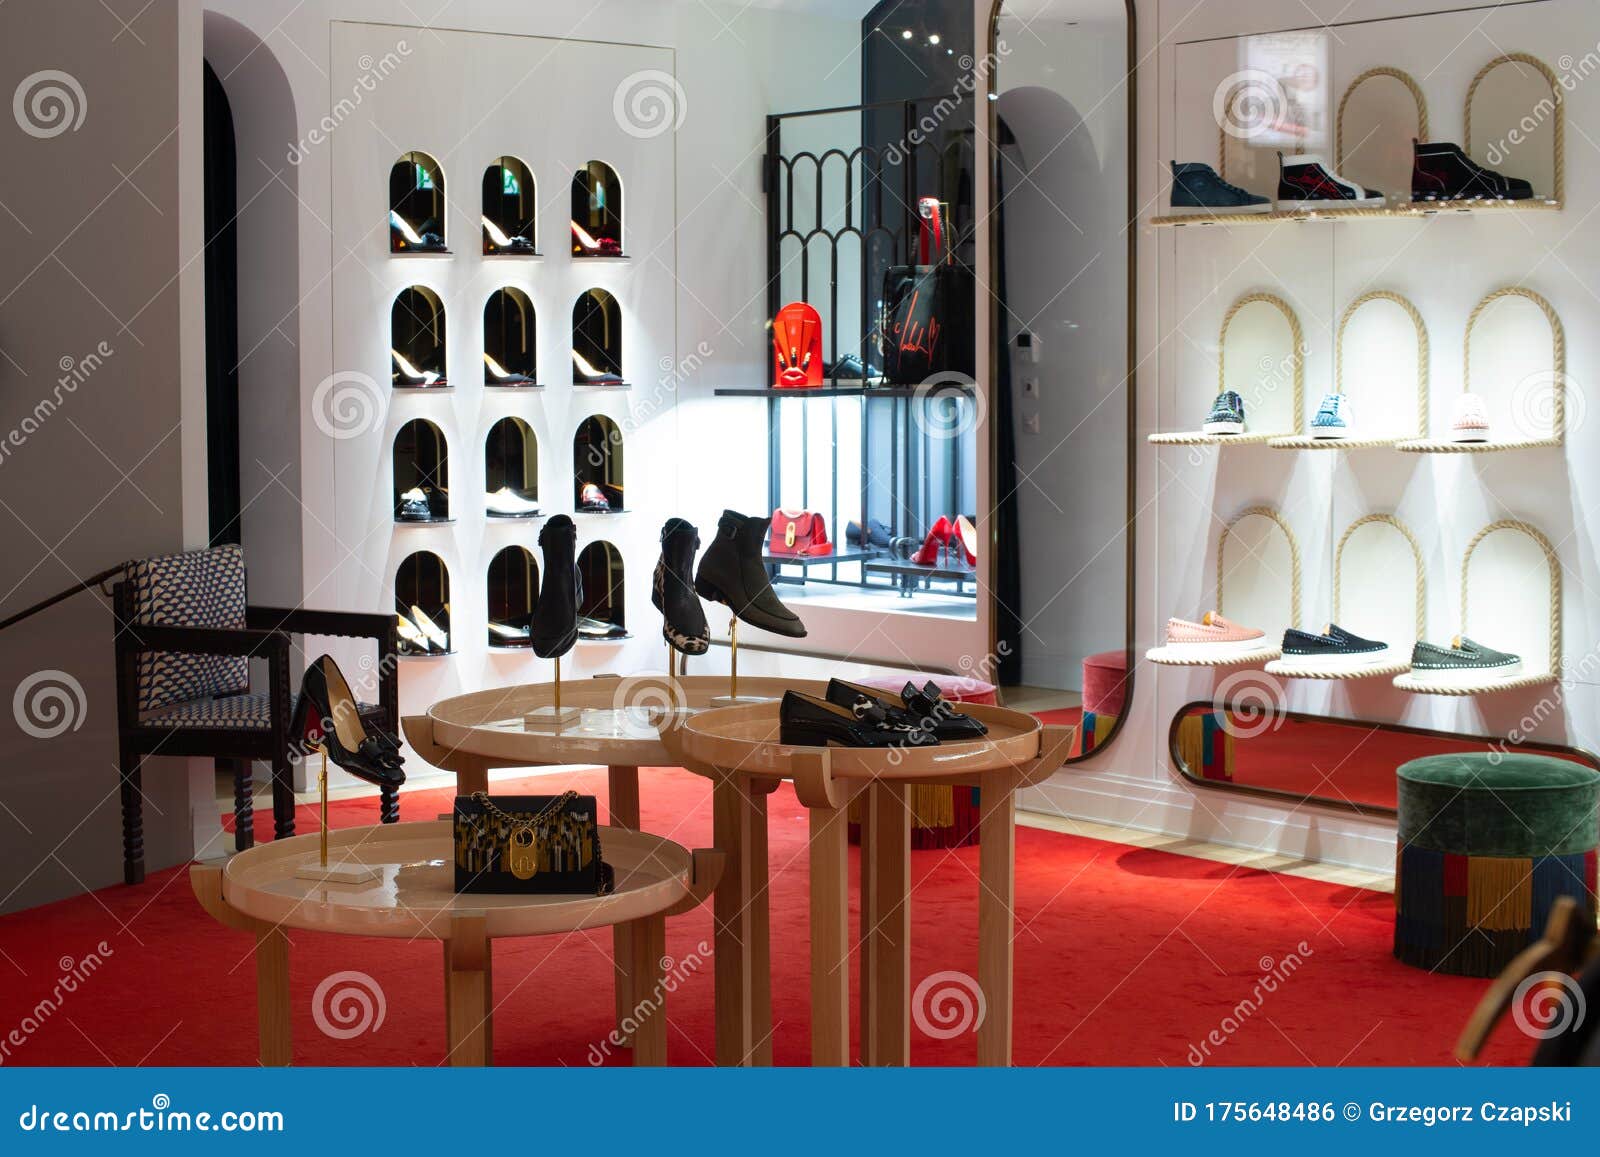 Christian Louboutin Window Store, Shoe with High-end Stiletto Footwear, on Display for Sale, Exposition Editorial Photo - of footwear, famous: 175648486